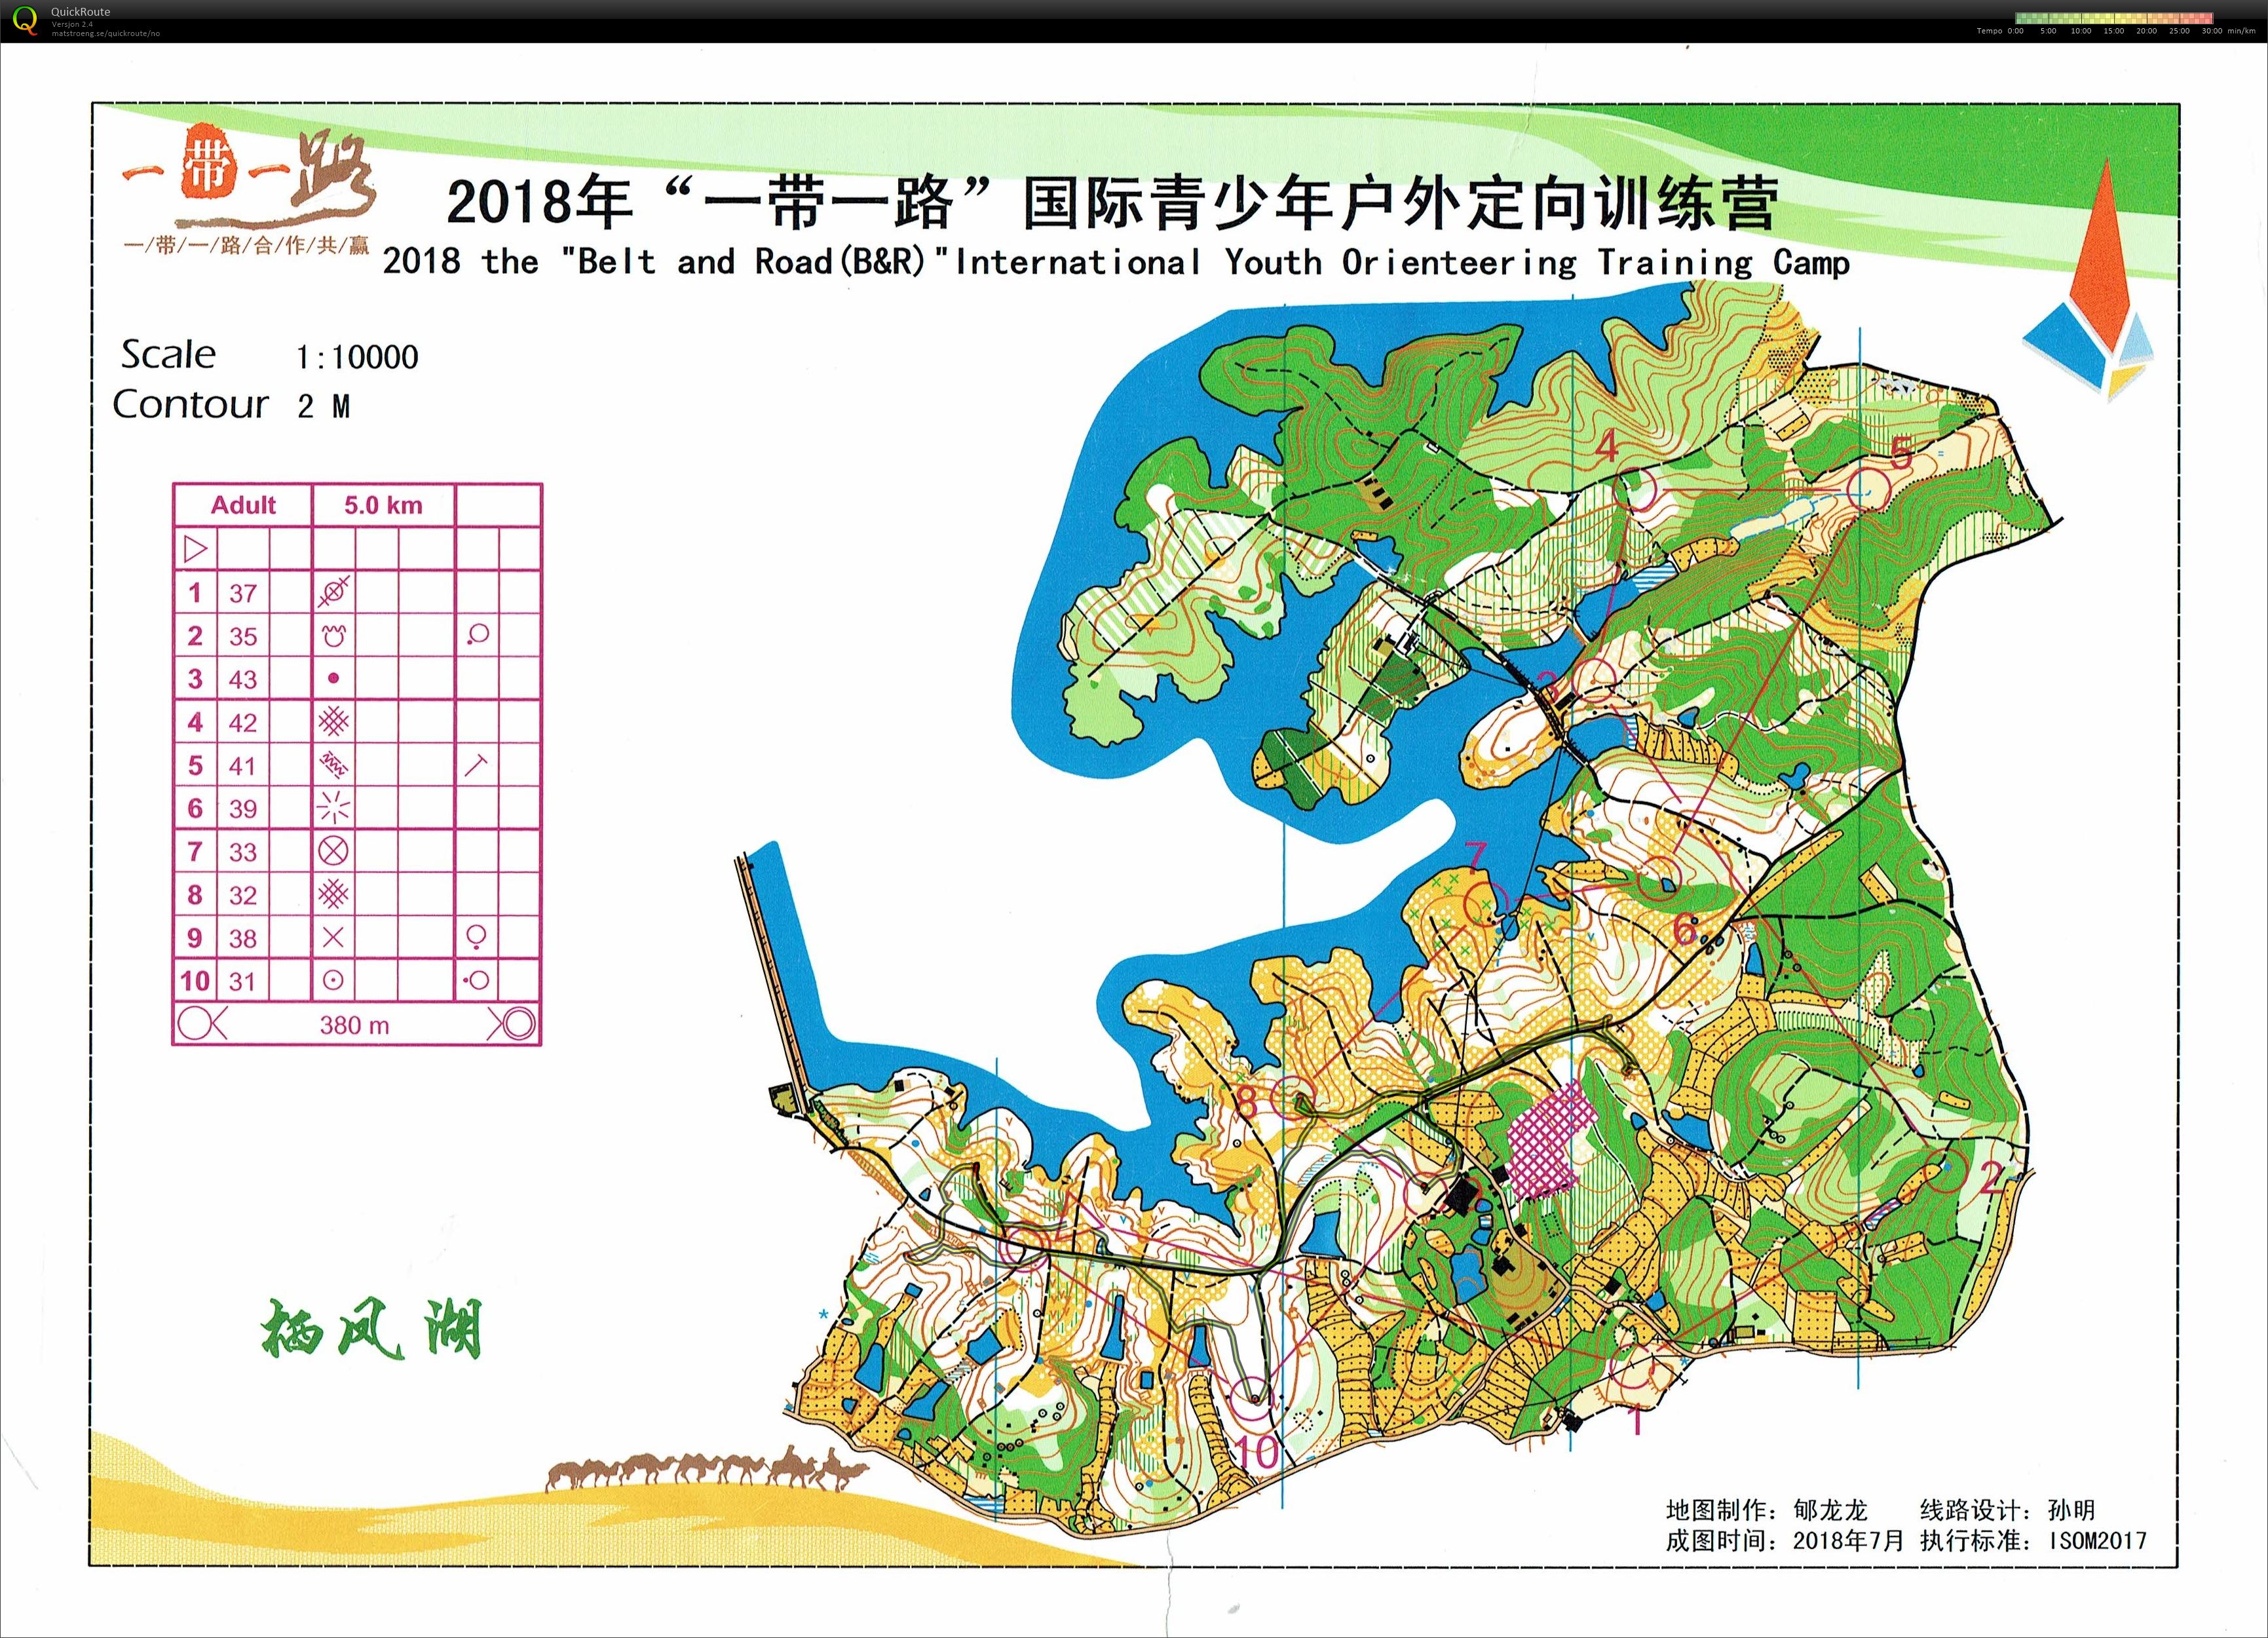 Belt and Road International Youth Orienteering Camp (26.10.2018)